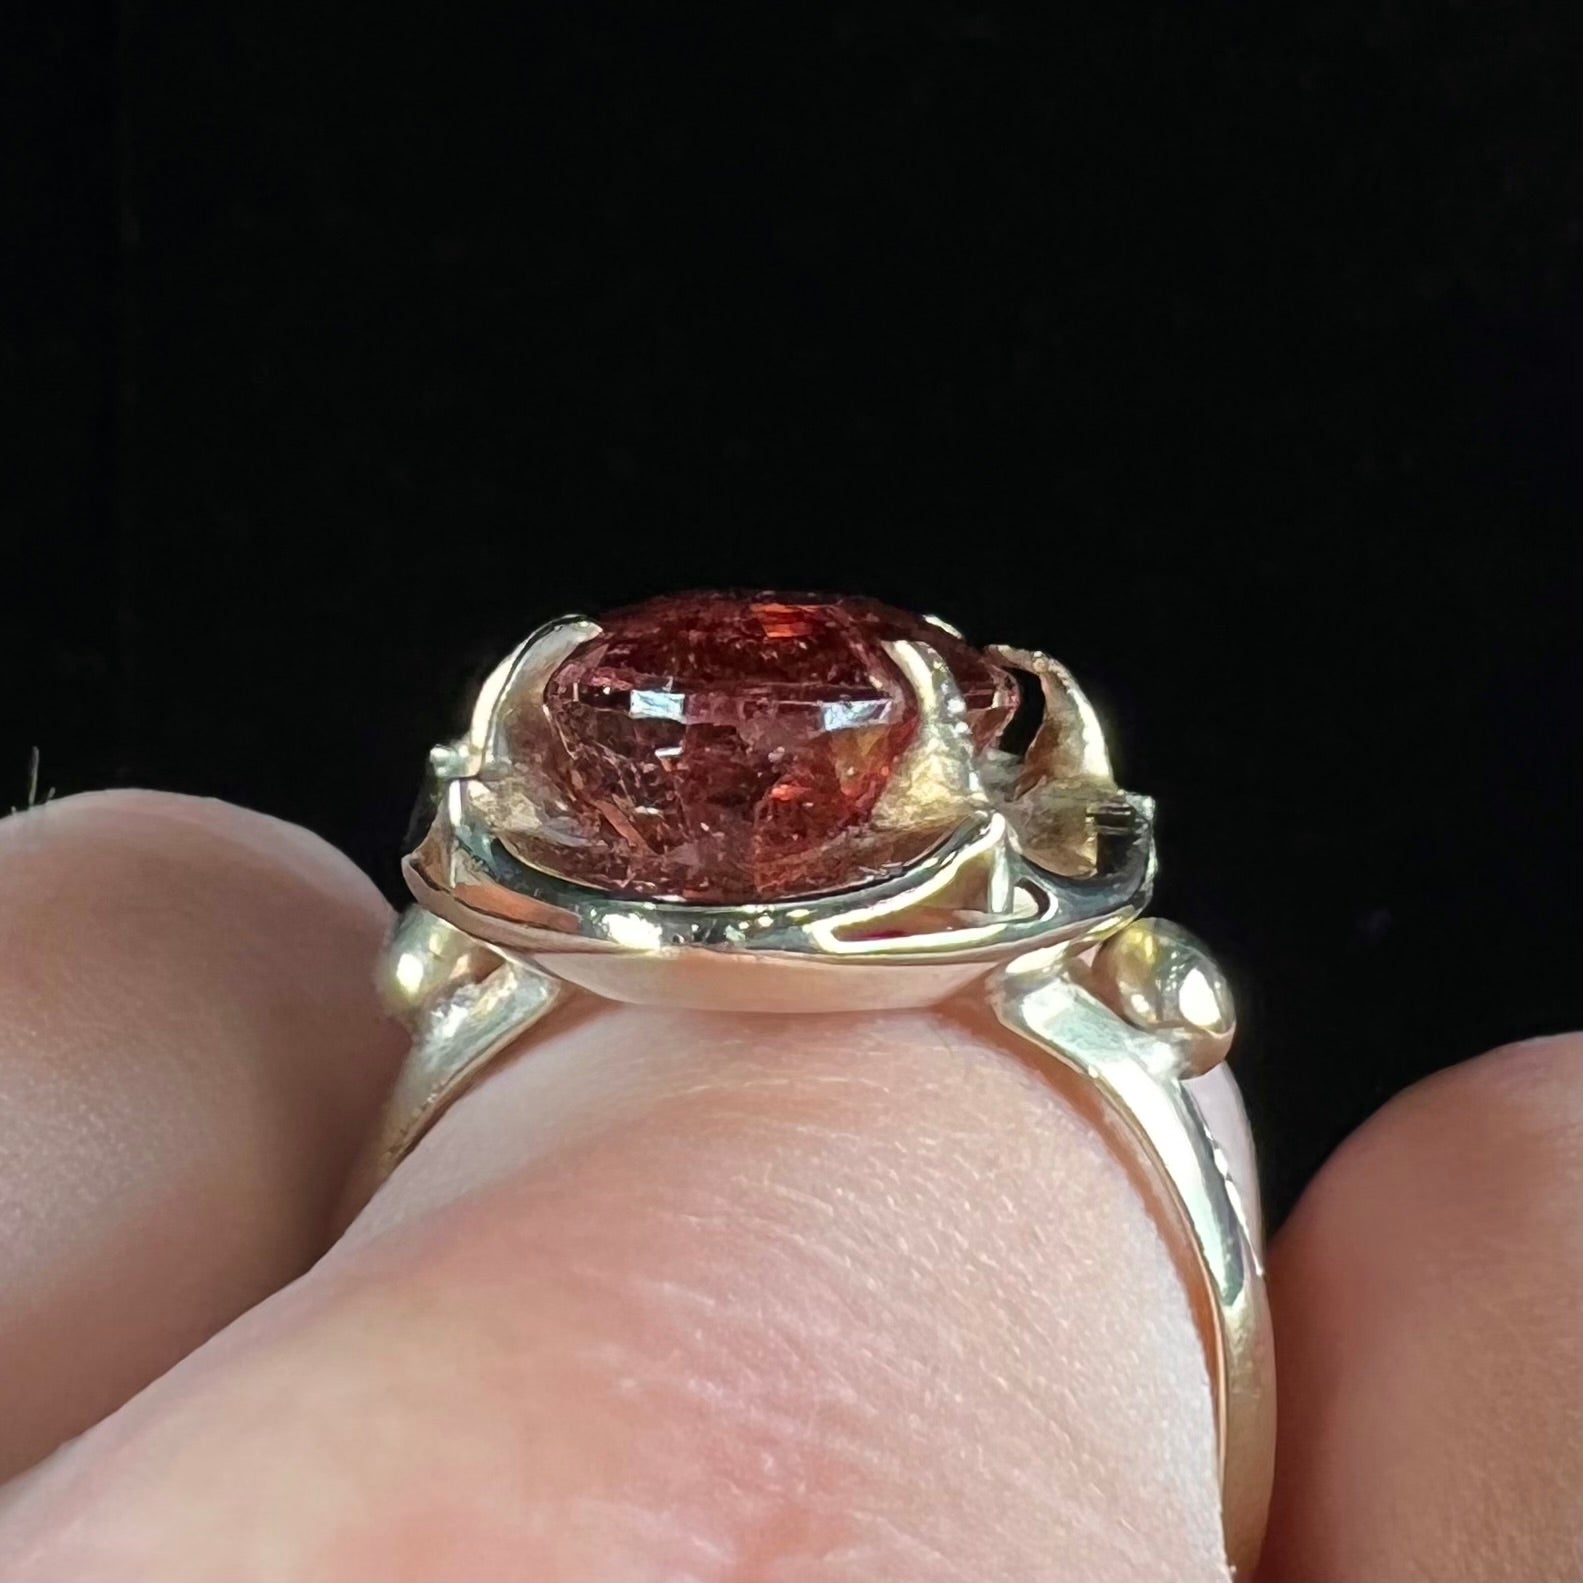 A yellow gold solitaire ring set with an oval cut, rootbeer colored tourmaline stone.